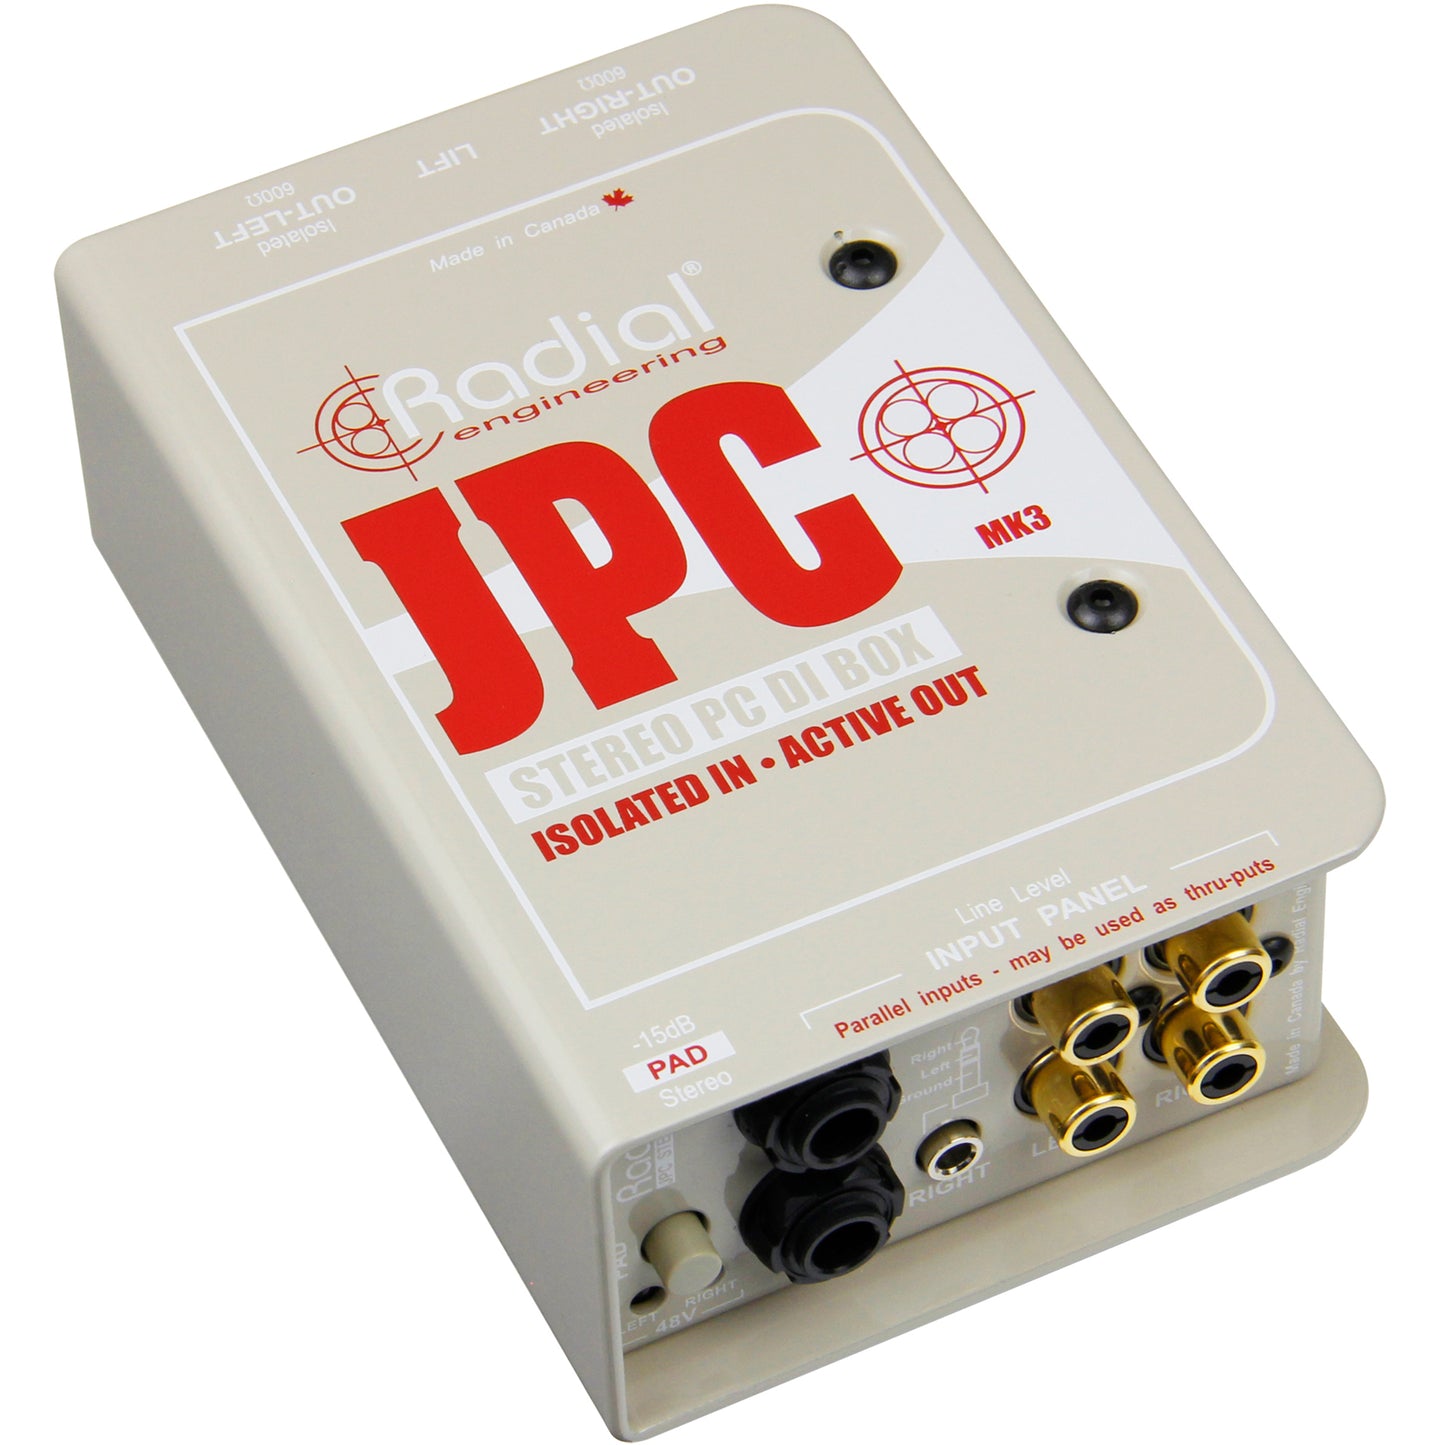 Radial JPC Active AV Direct Box for Computer Soundcards, CD, DVD, MP3 Players